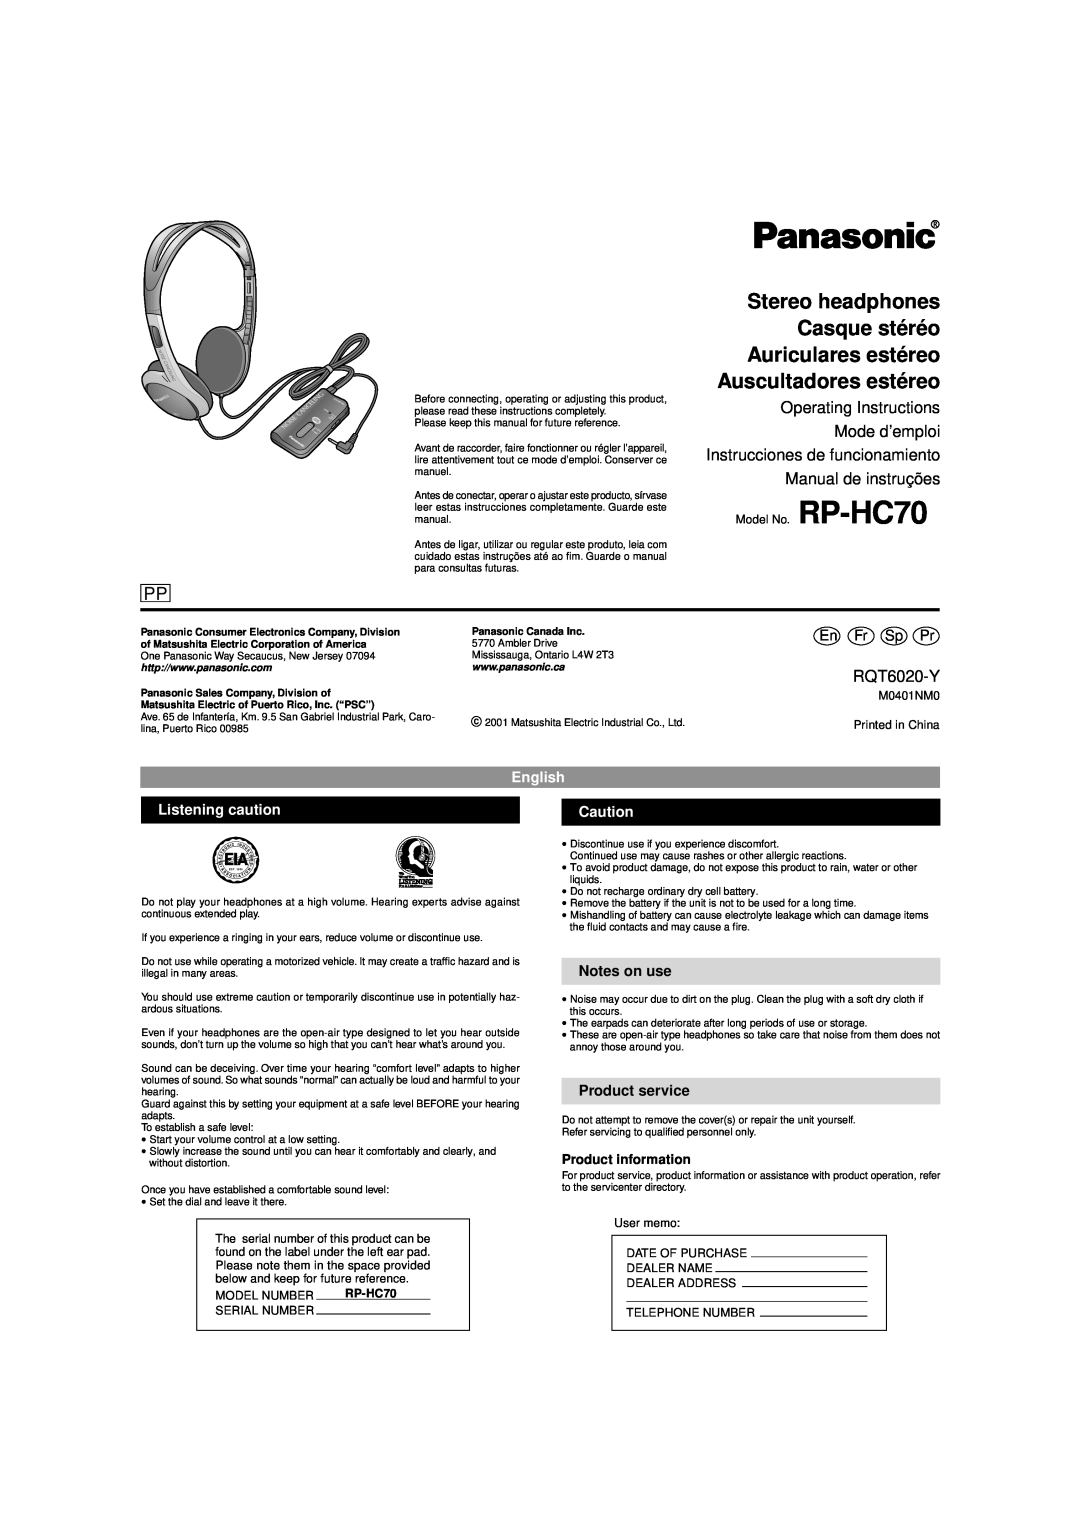 Panasonic RP-HC70 operating instructions English, Listening caution, Notes on use, Product service, Product information 